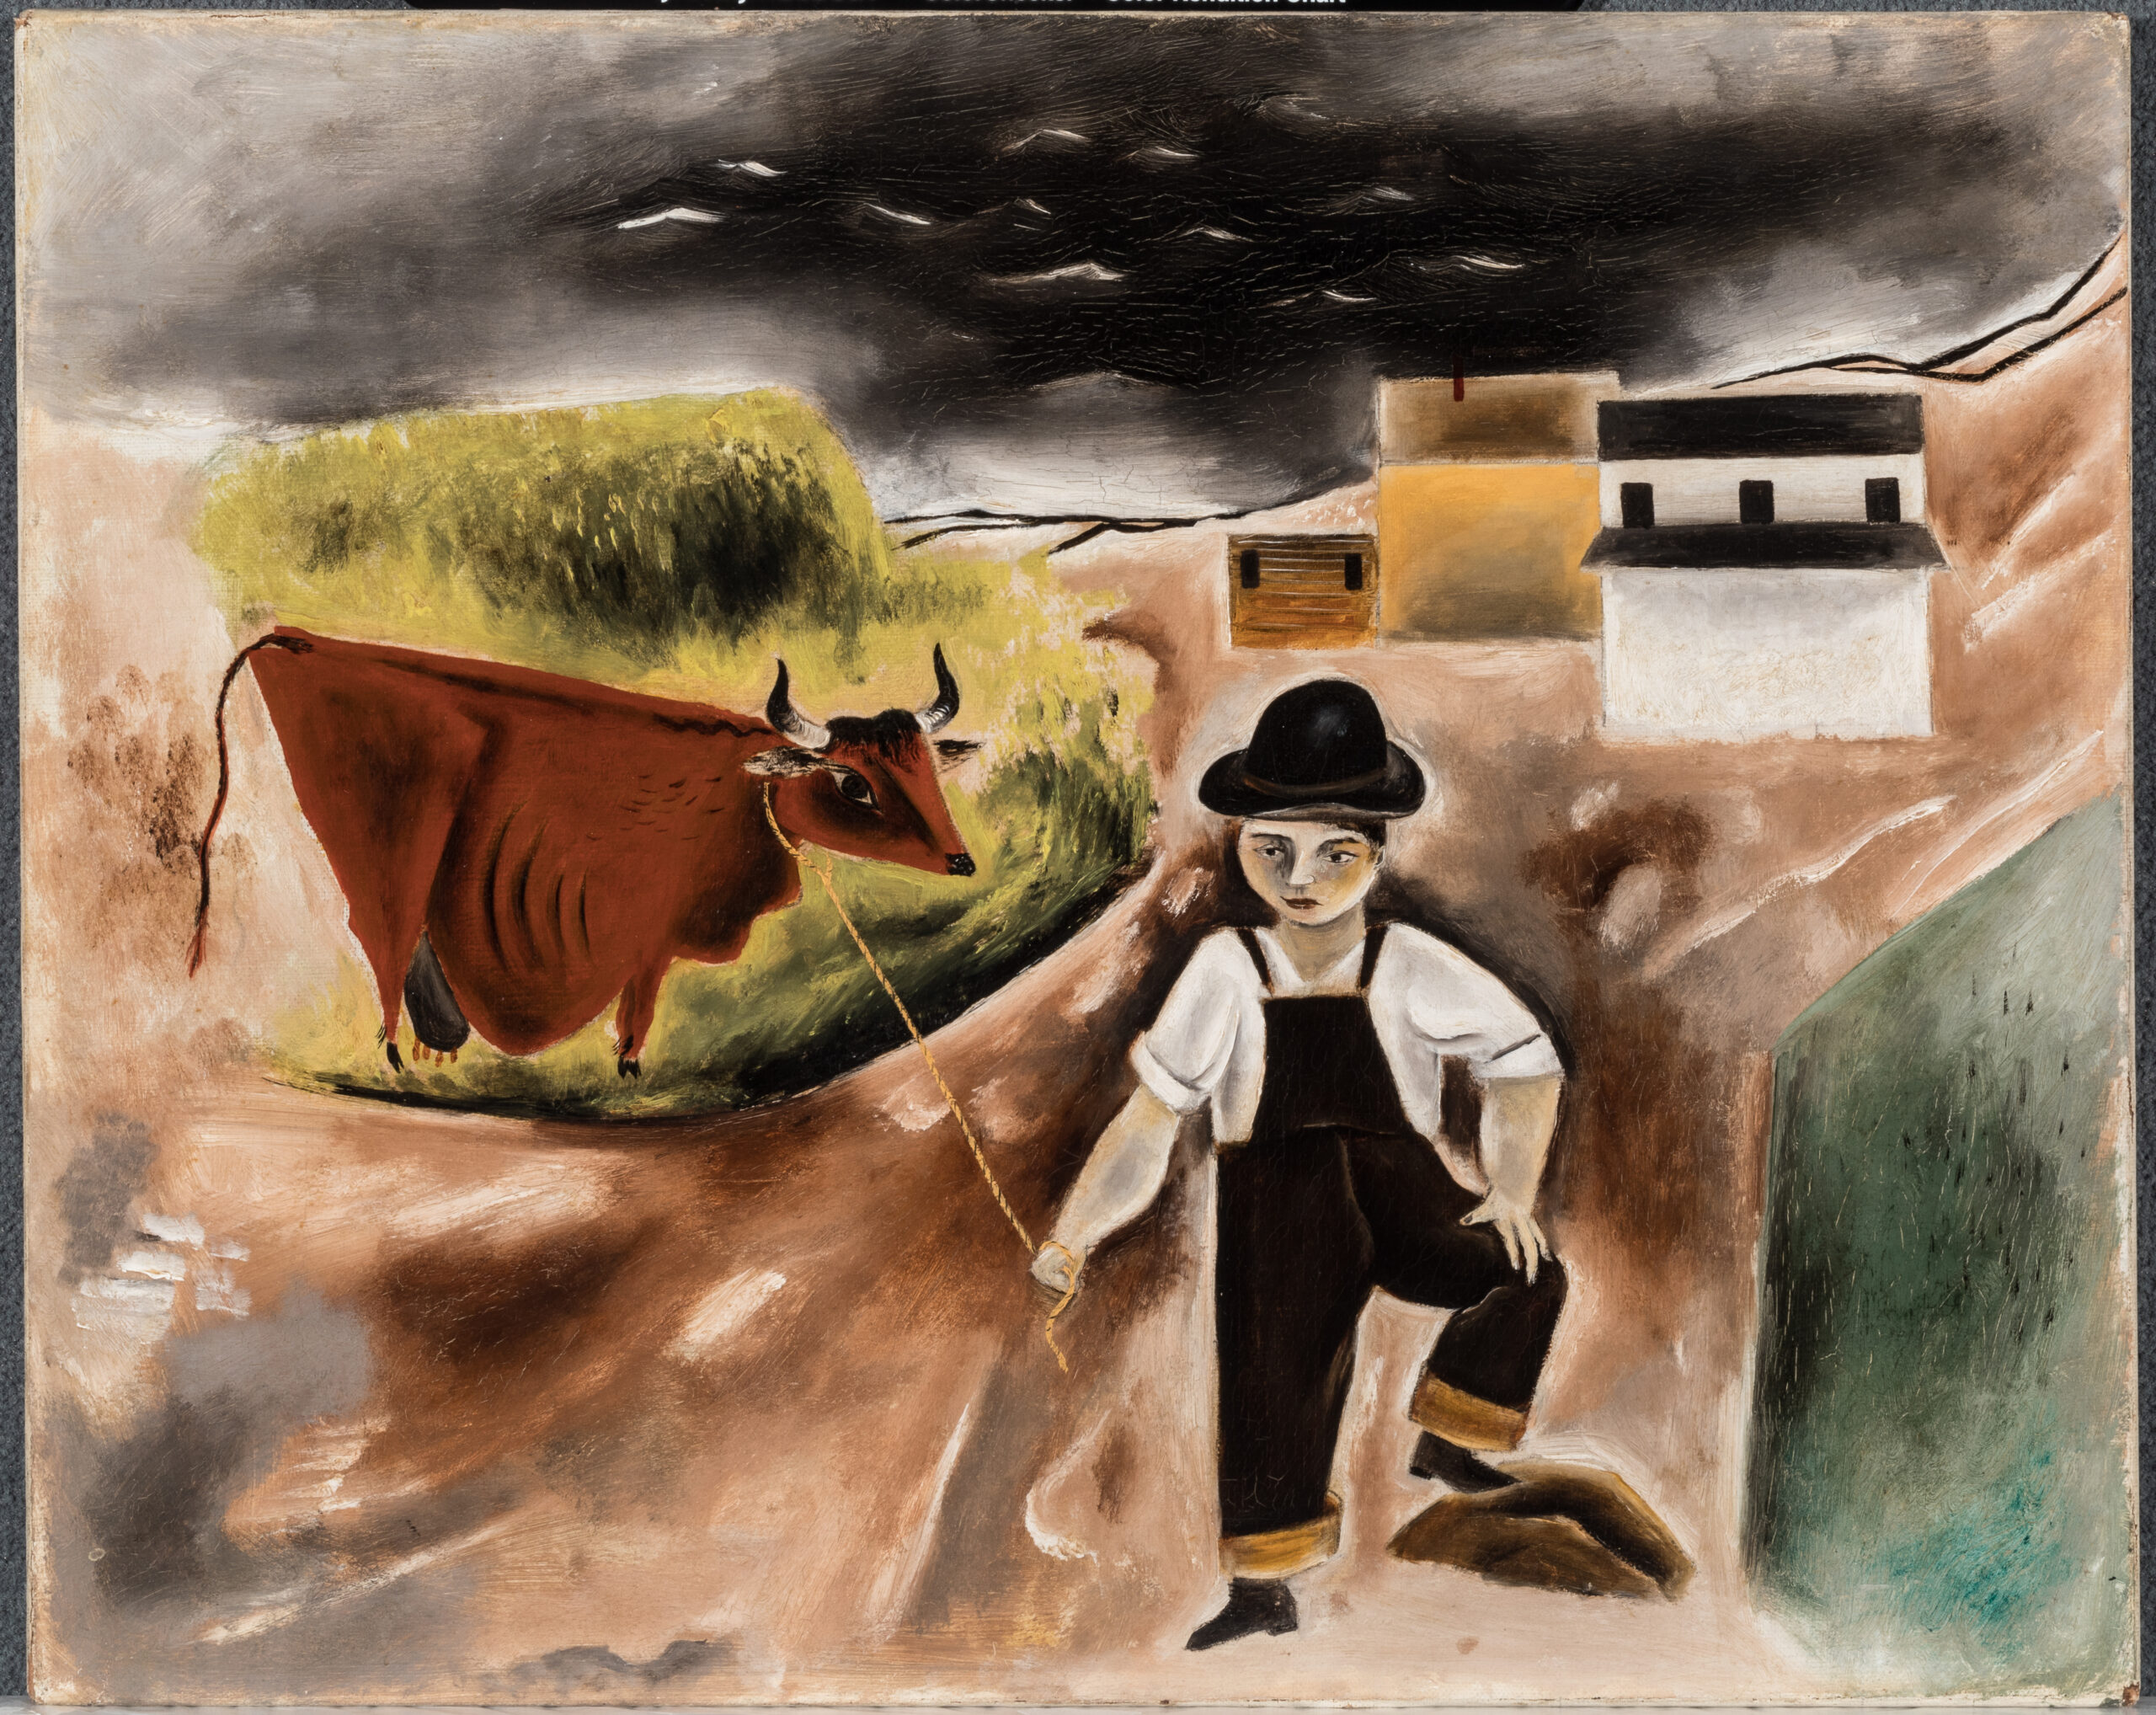 Painting of a boy and a cow, with buildings in the background and a black sky.